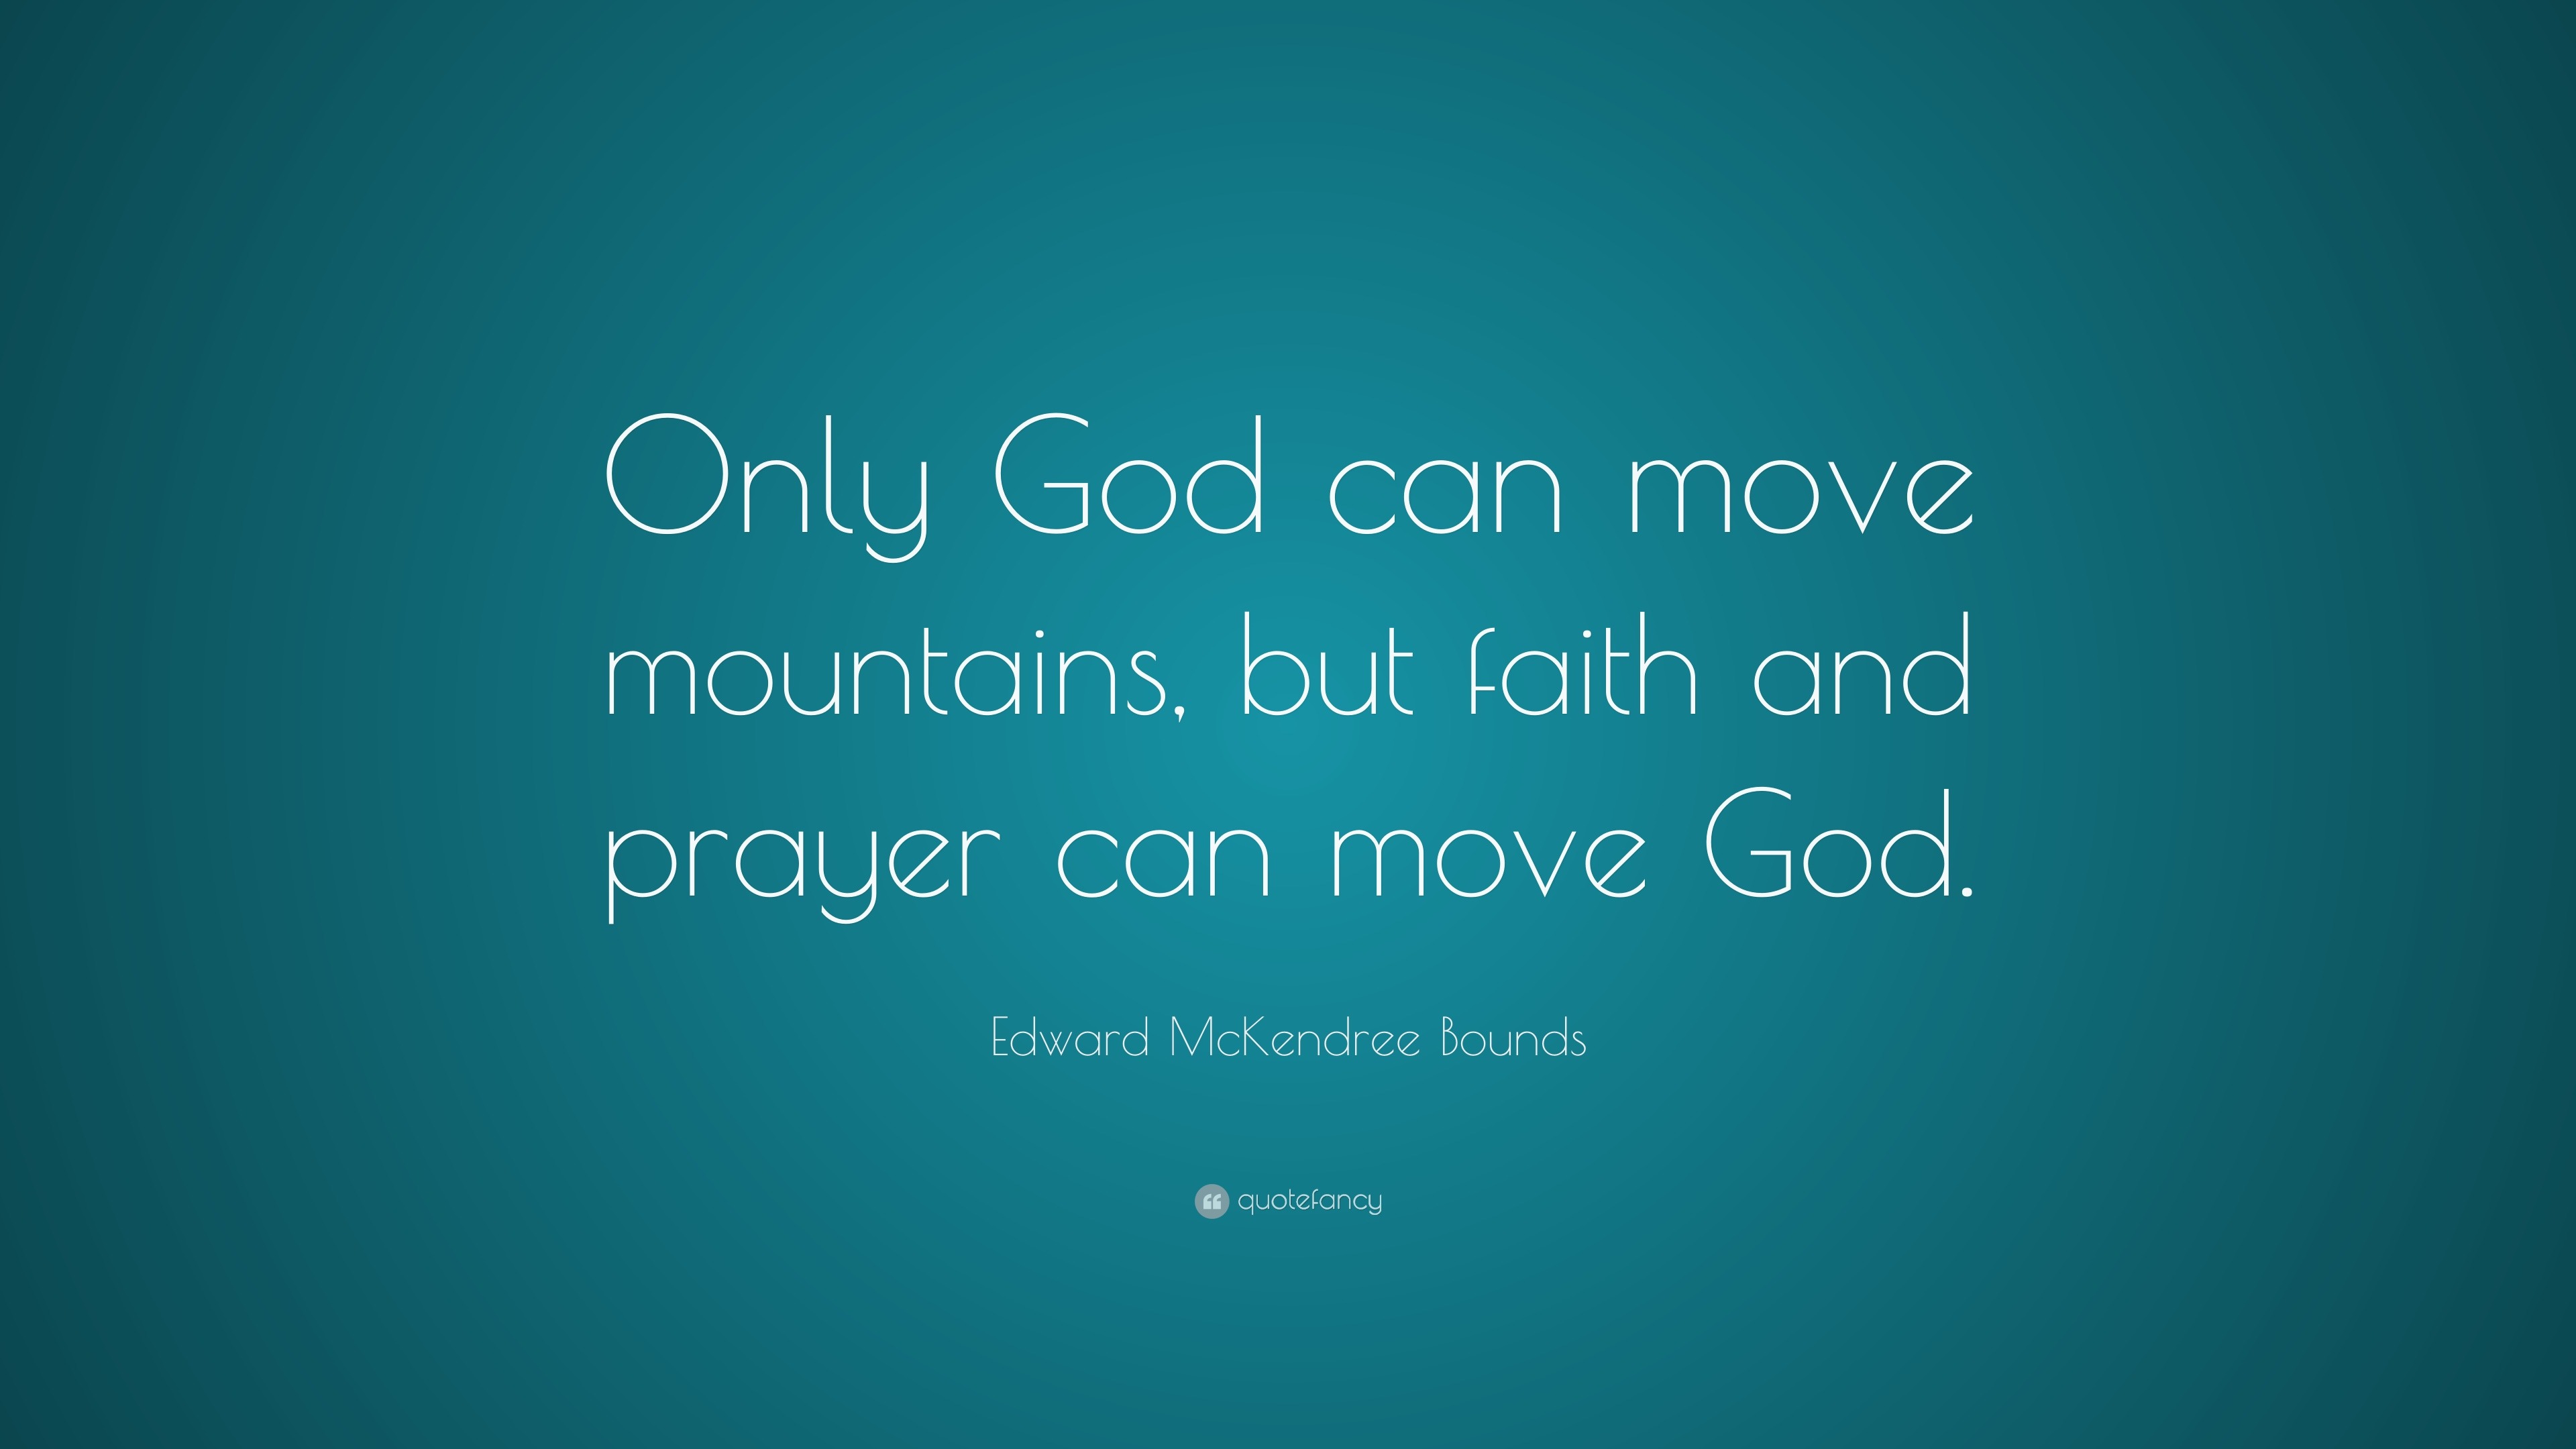 Edward McKendree Bounds Quote: "Only God can move mountains, but faith and prayer can move God ...